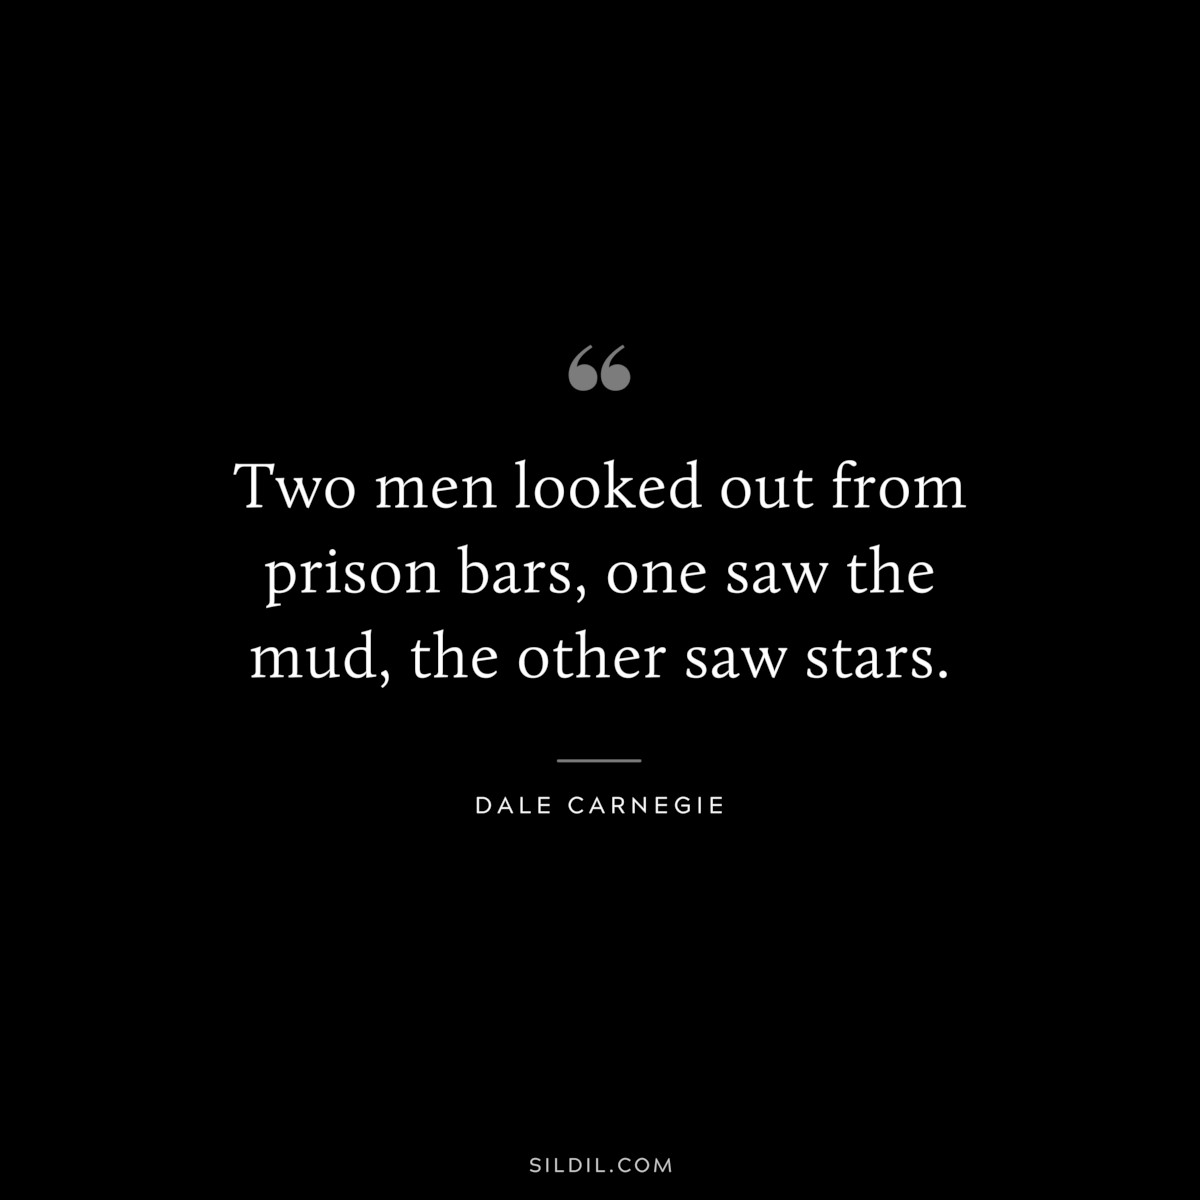 Two men looked out from prison bars, one saw the mud, the other saw stars.― Dale Carnegie